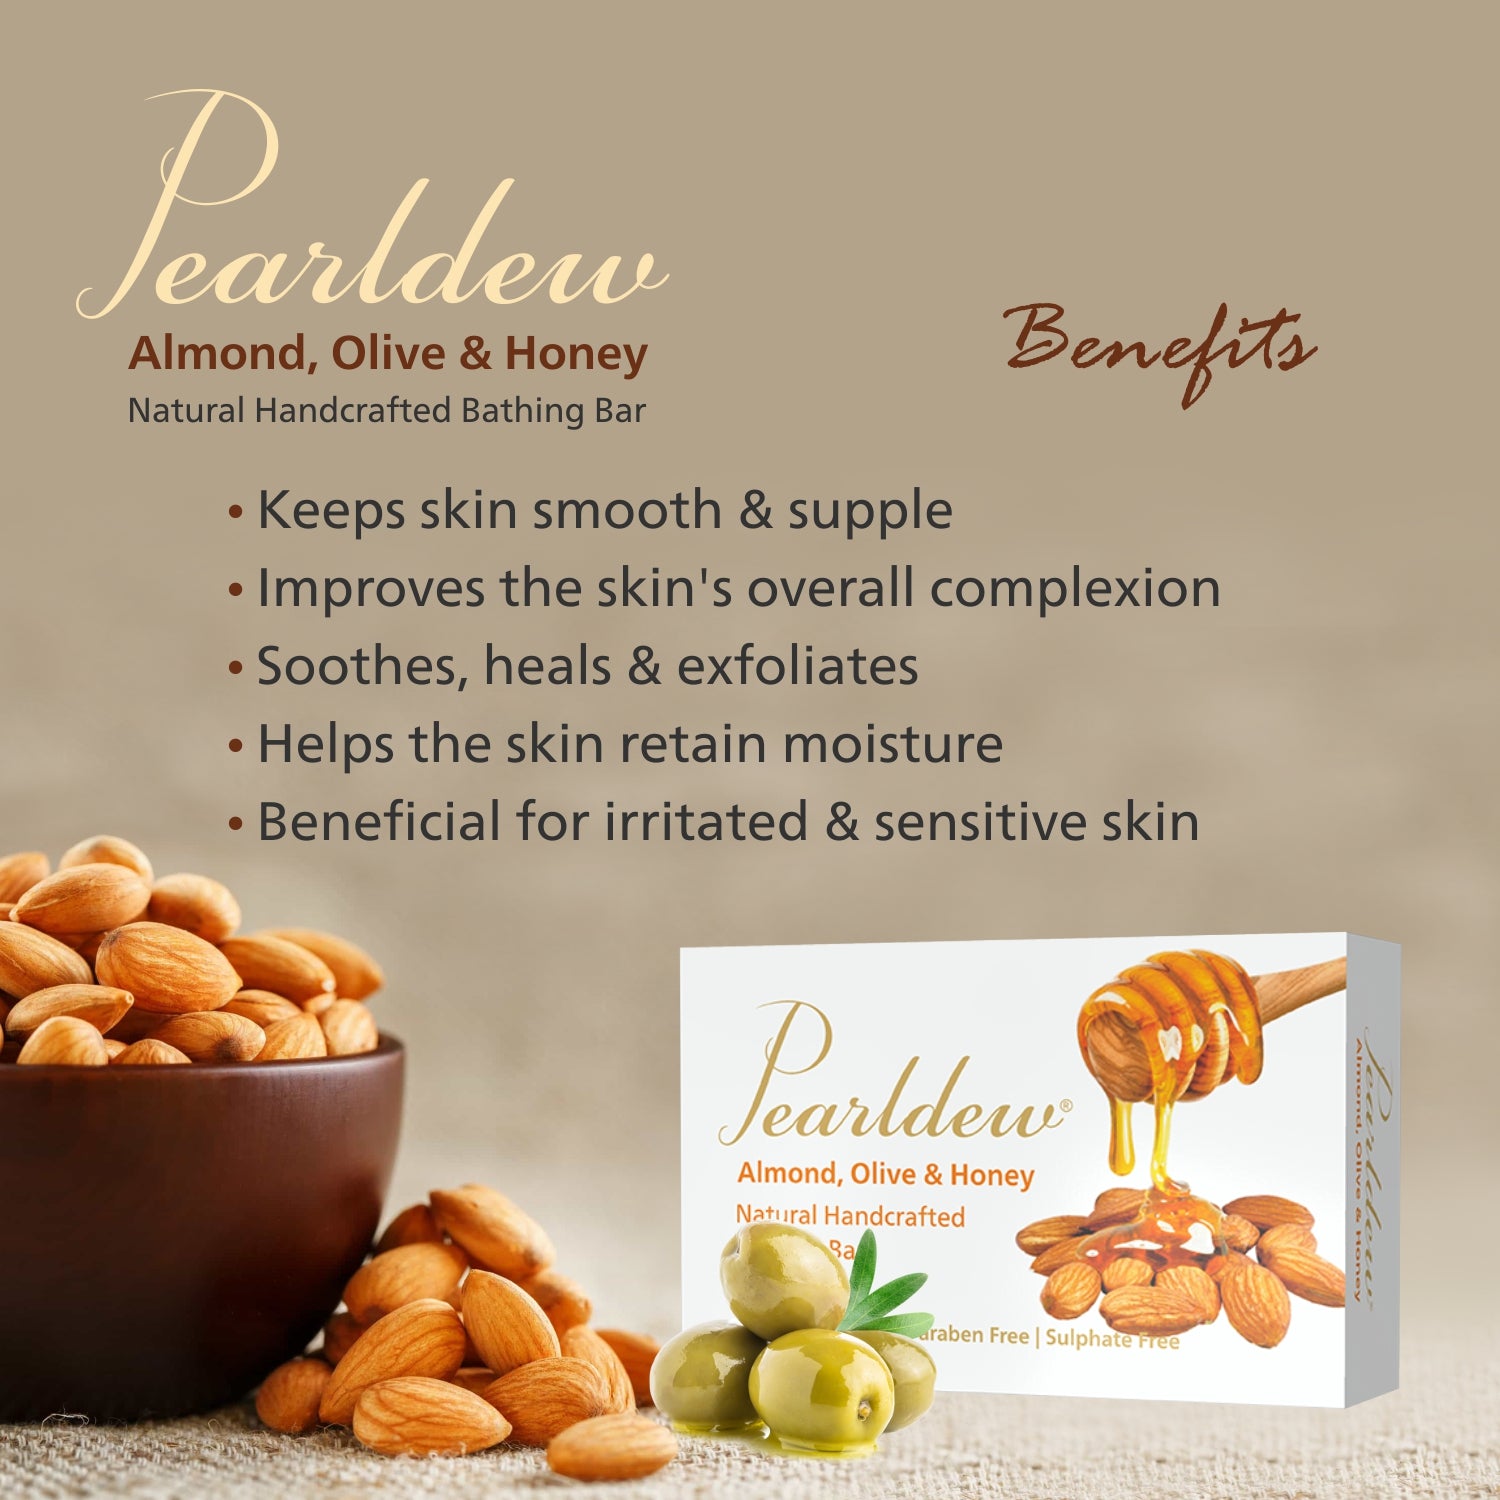 Pearldew Almond, Olive & Honey Natural Handcrafted Bathing Bar (75 gm)